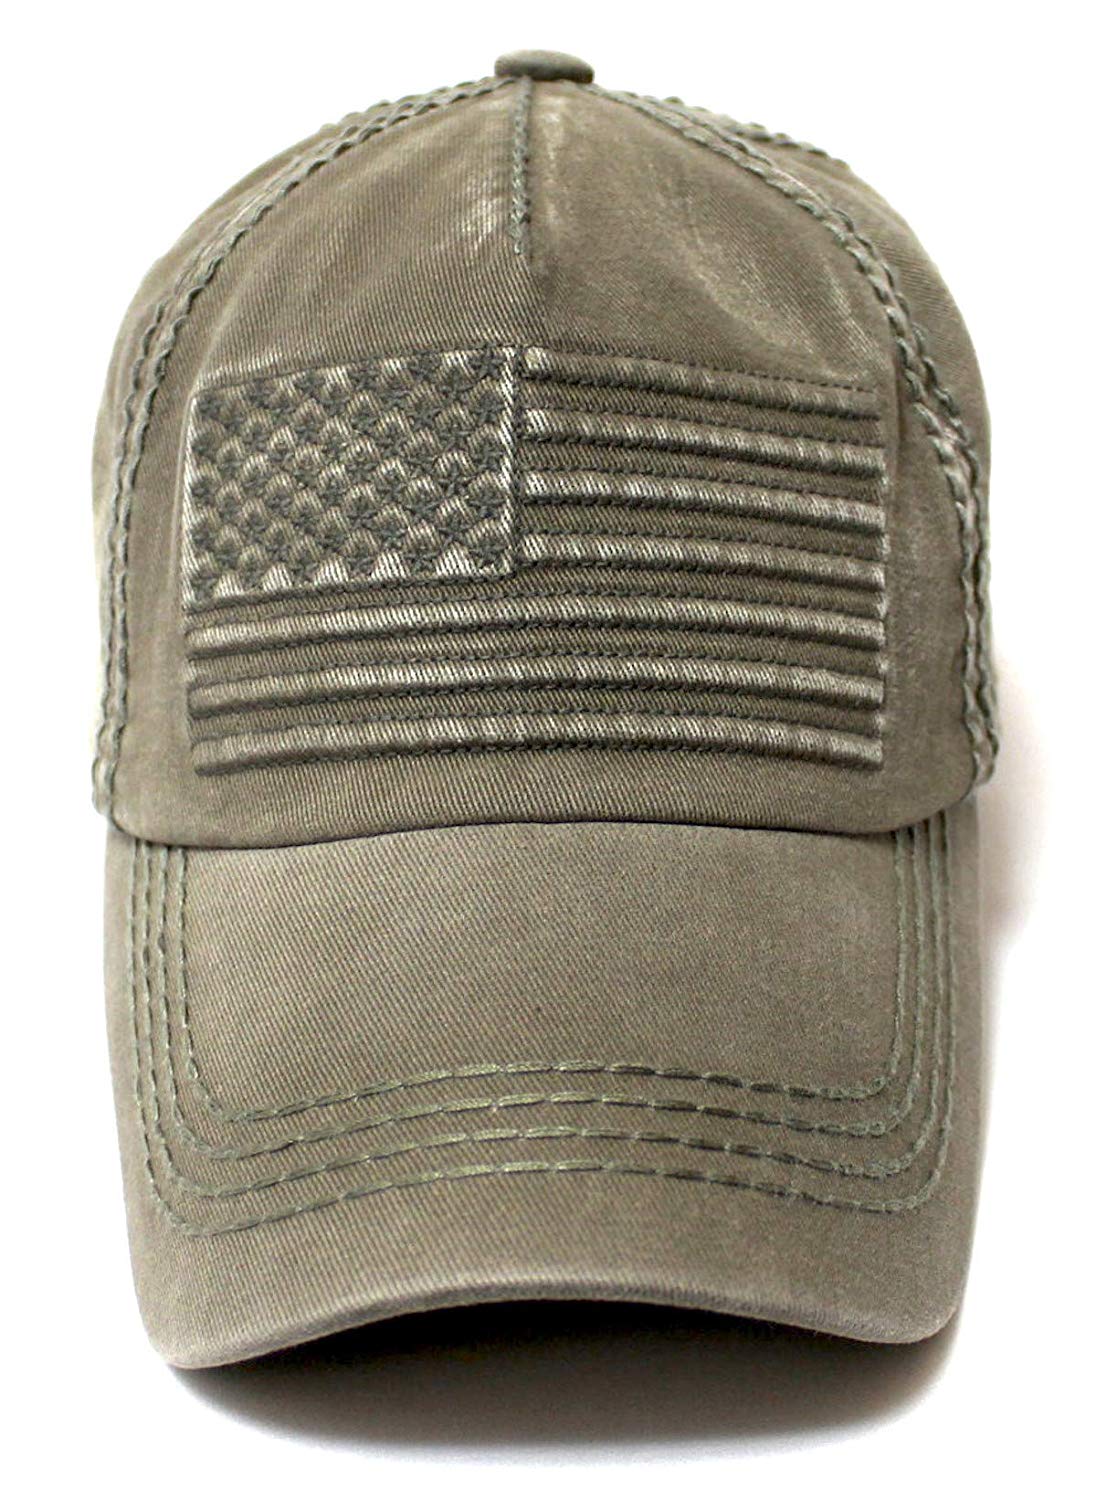 Classic Low Profile USA Vintage Flag Ball Cap, Washed Army Olive - Caps 'N Vintage 